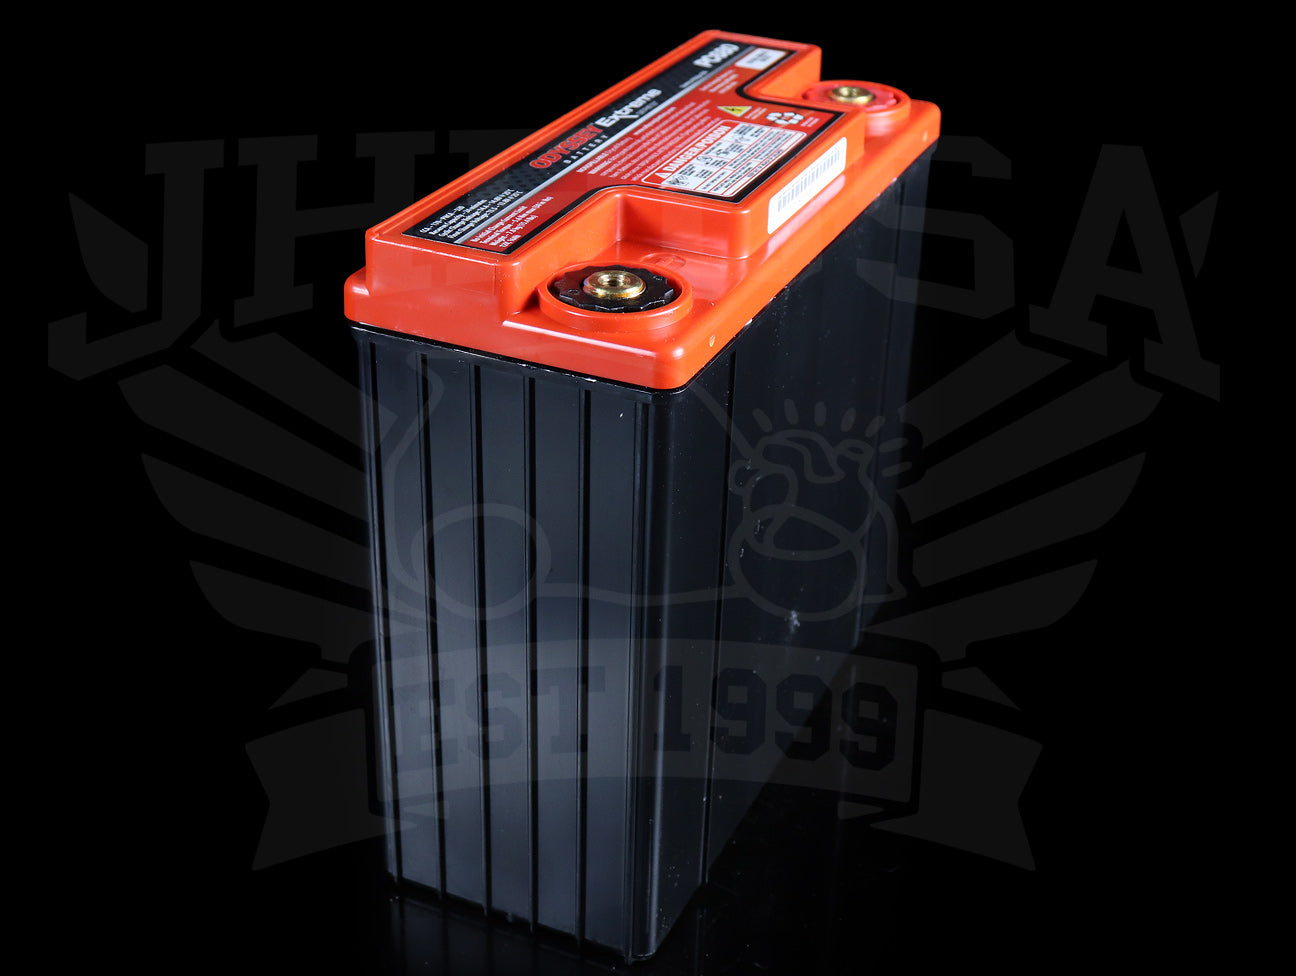 Odyssey PC680 Drycell Battery